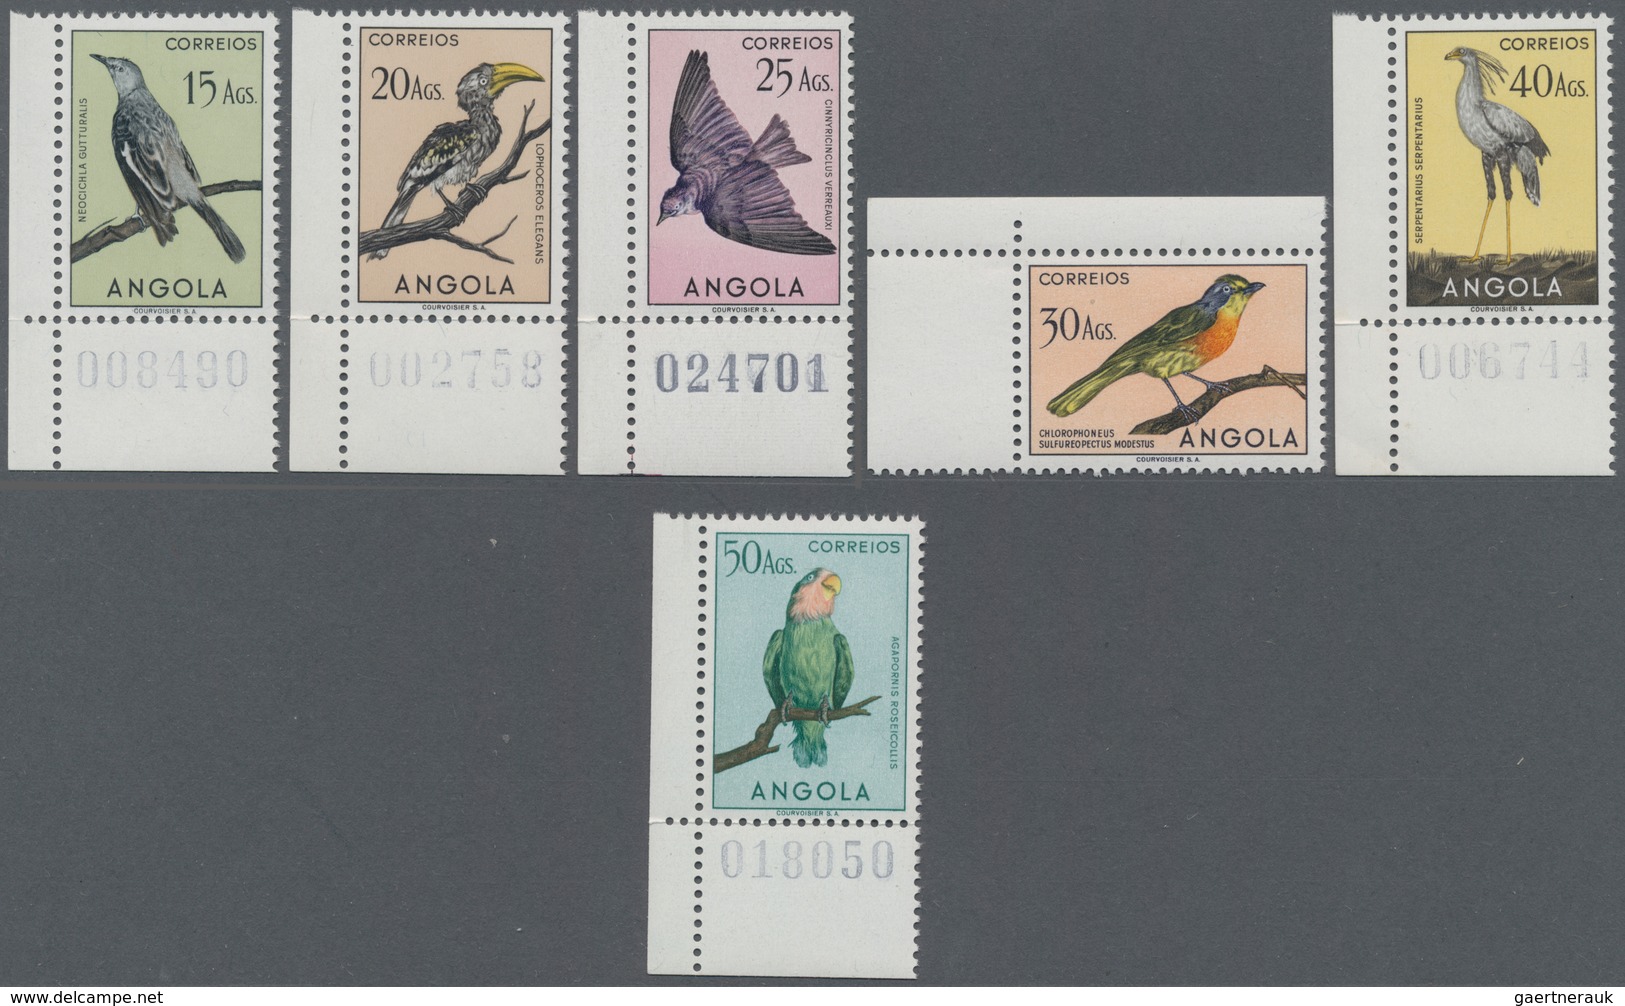 Angola: 1951, Domestic Birds, 5c.-50a., Complete Set Of 24 Stamps, Mint Never Hinged. - Angola